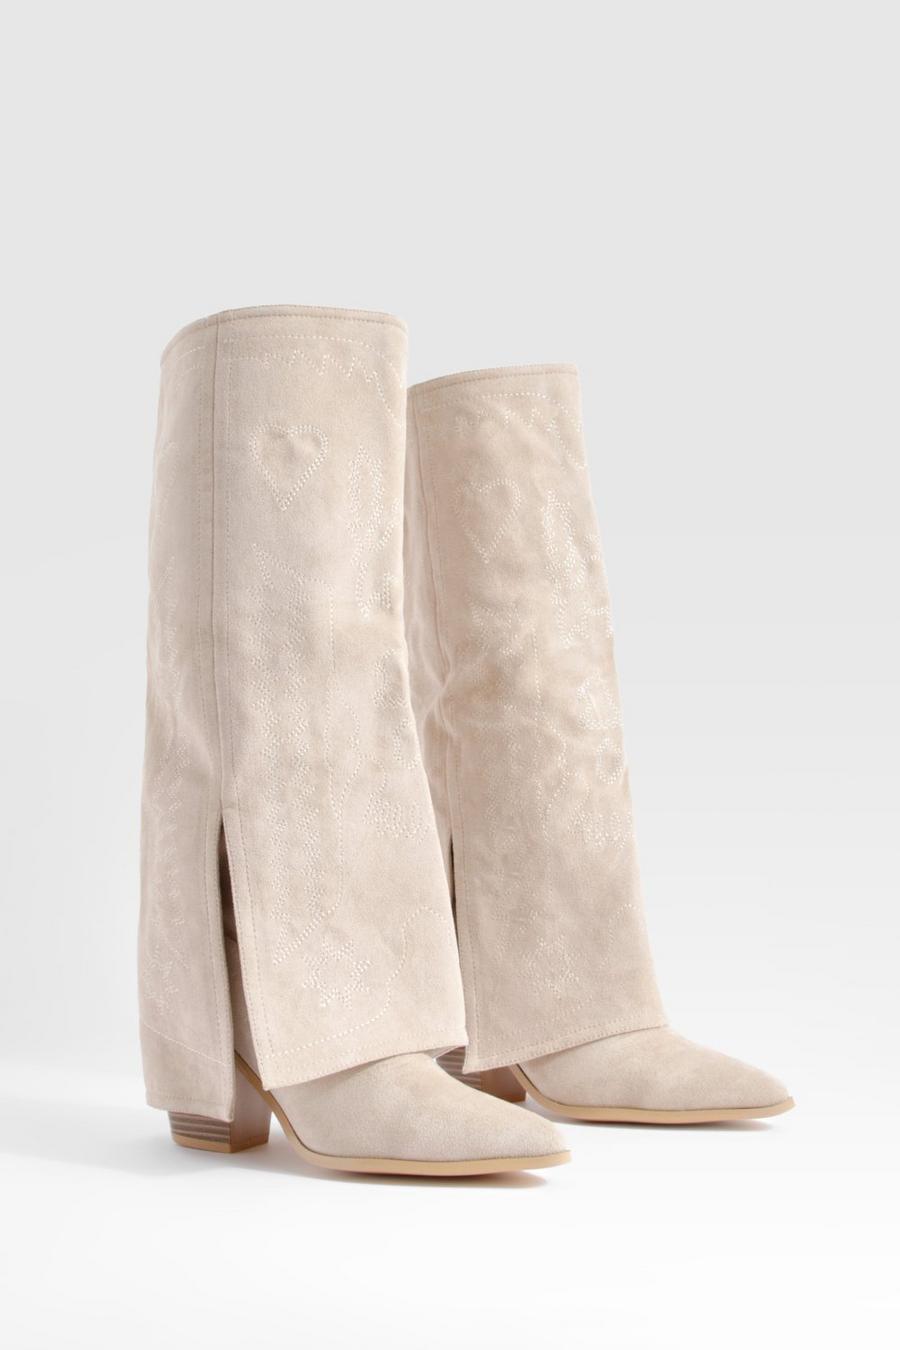 Sand Wide Fit Foldover Western Knee High Boots 